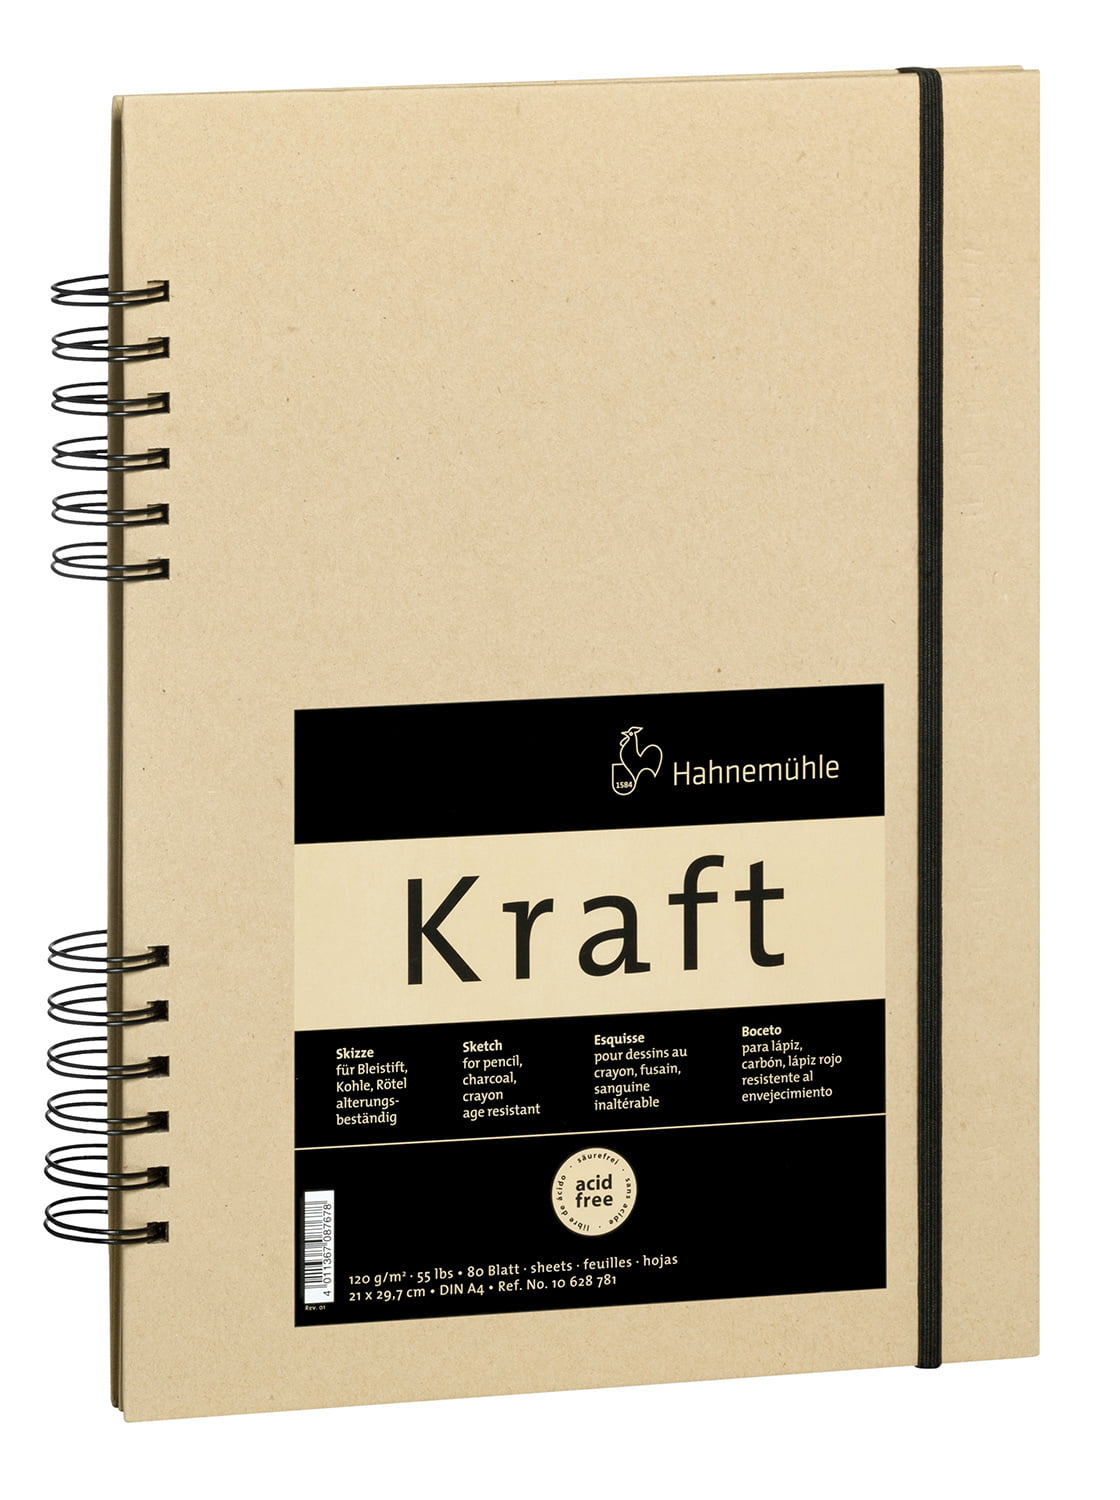 Hahnemühle Kraft Paper A4 Sketch Book (Ochre Cover, 80 Sheets